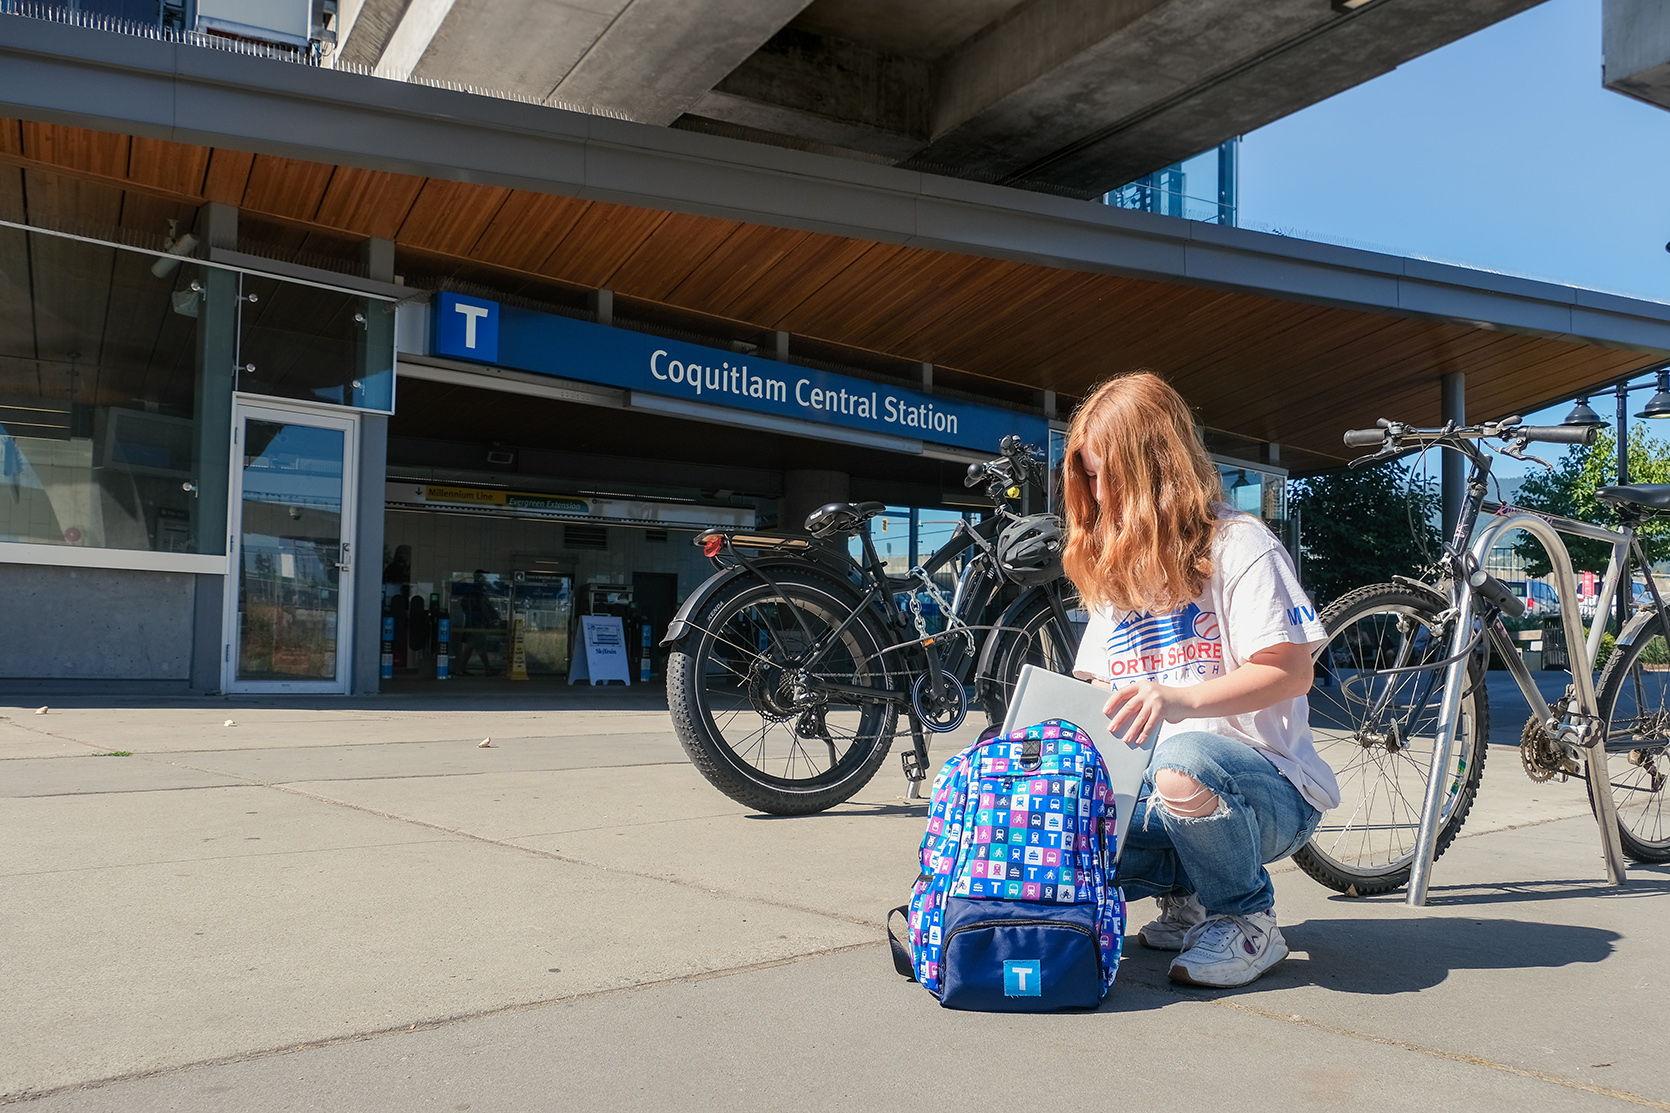 Student with TransLink backpack in front of Coquitlam Central Station